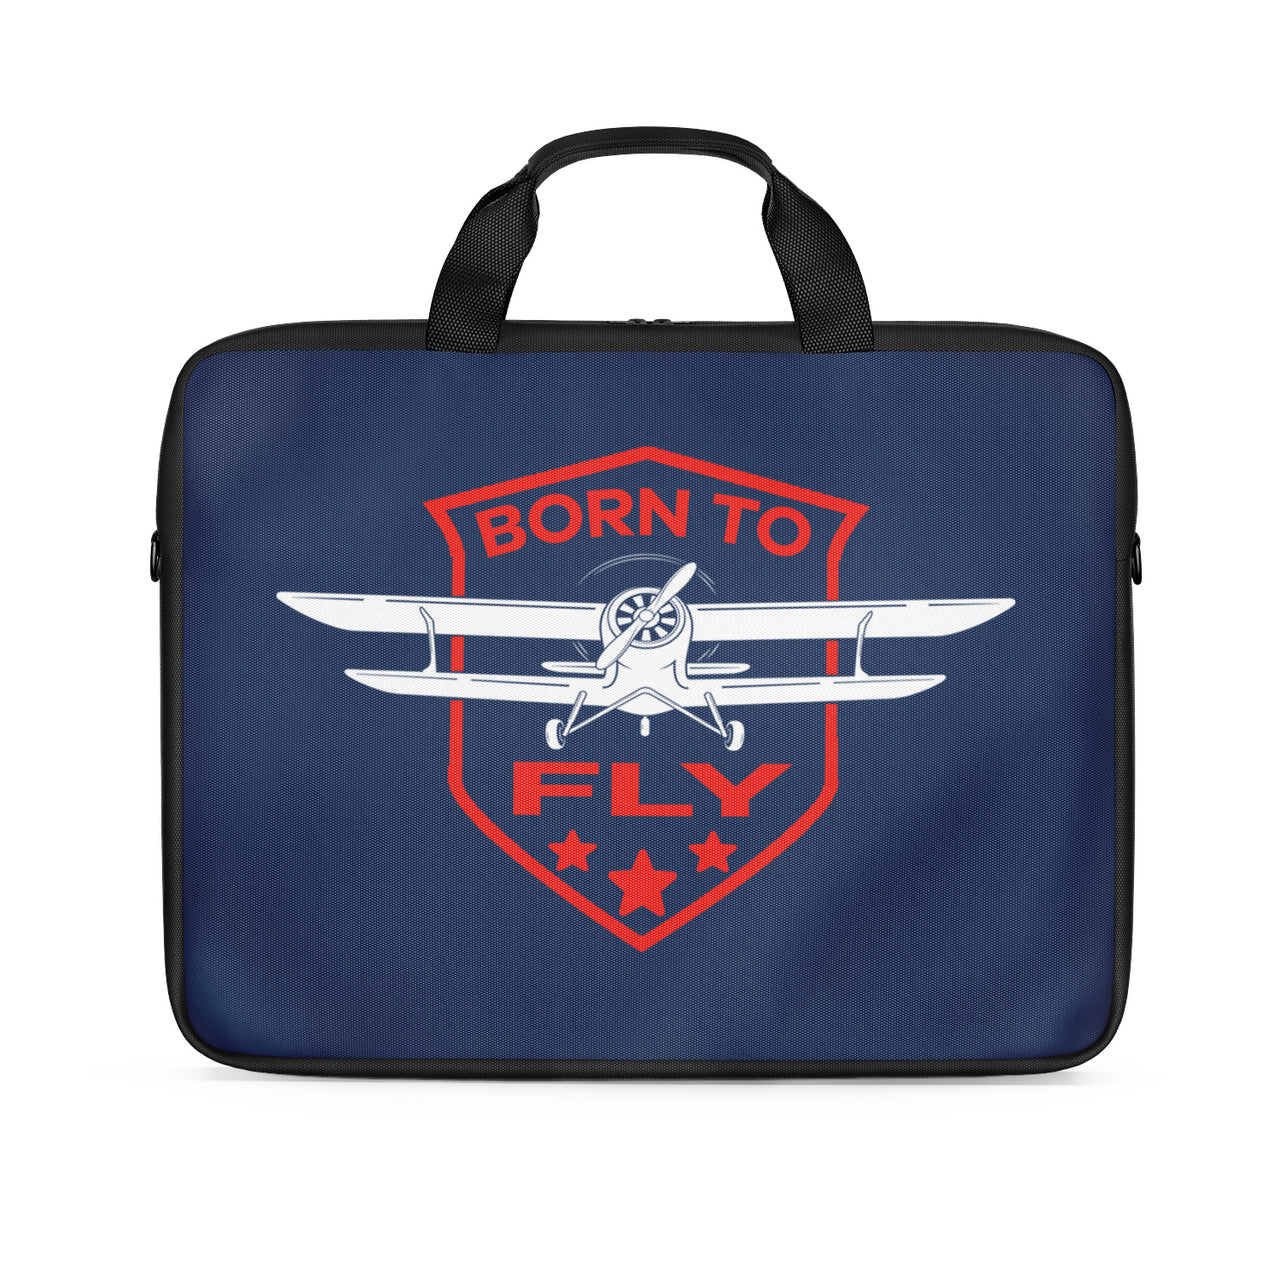 Born To Fly Designed Laptop & Tablet Bags